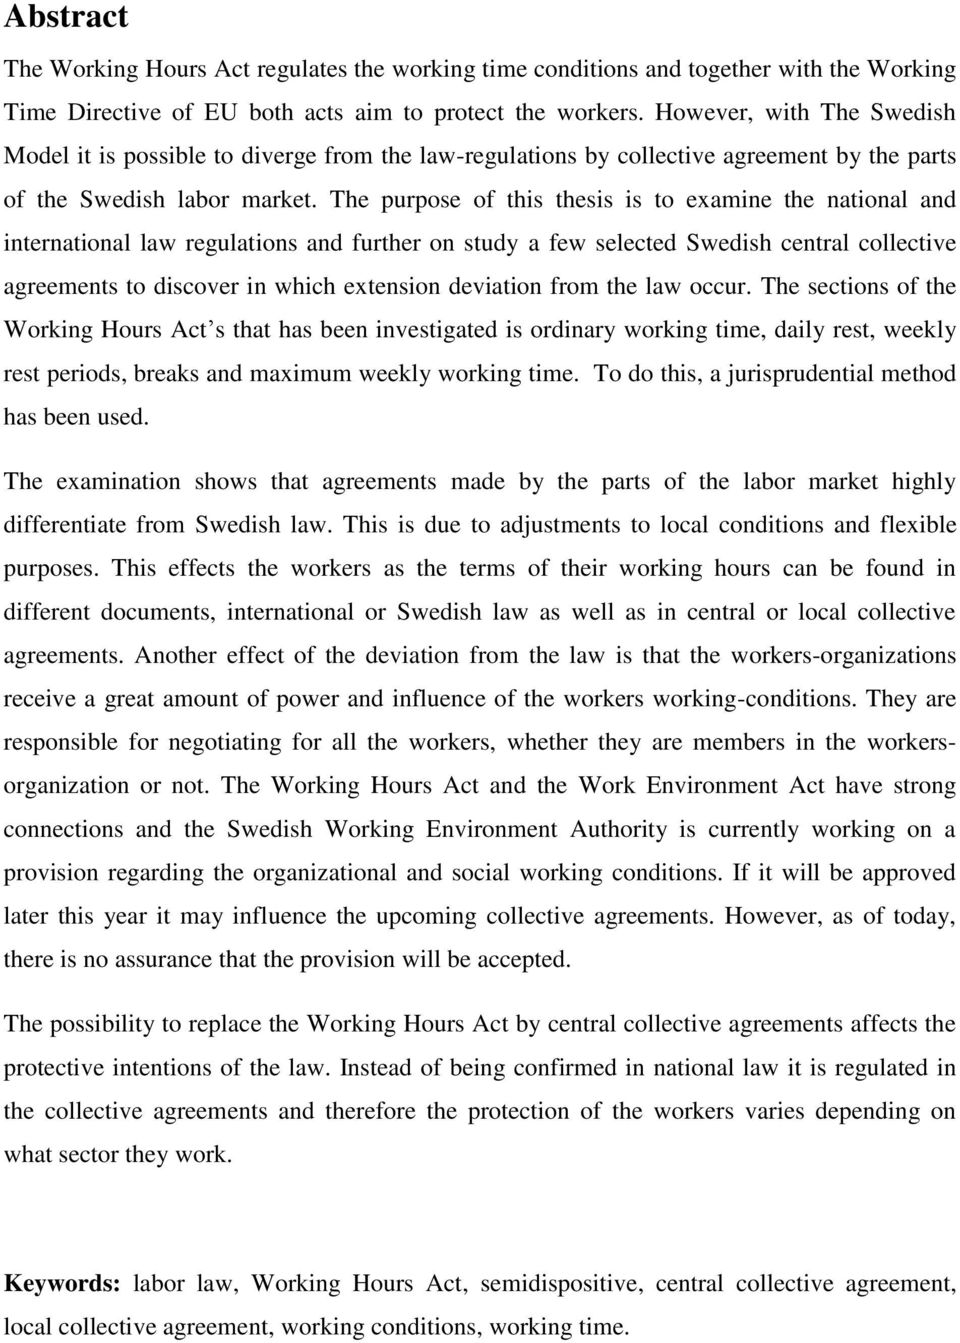 The purpose of this thesis is to examine the national and international law regulations and further on study a few selected Swedish central collective agreements to discover in which extension